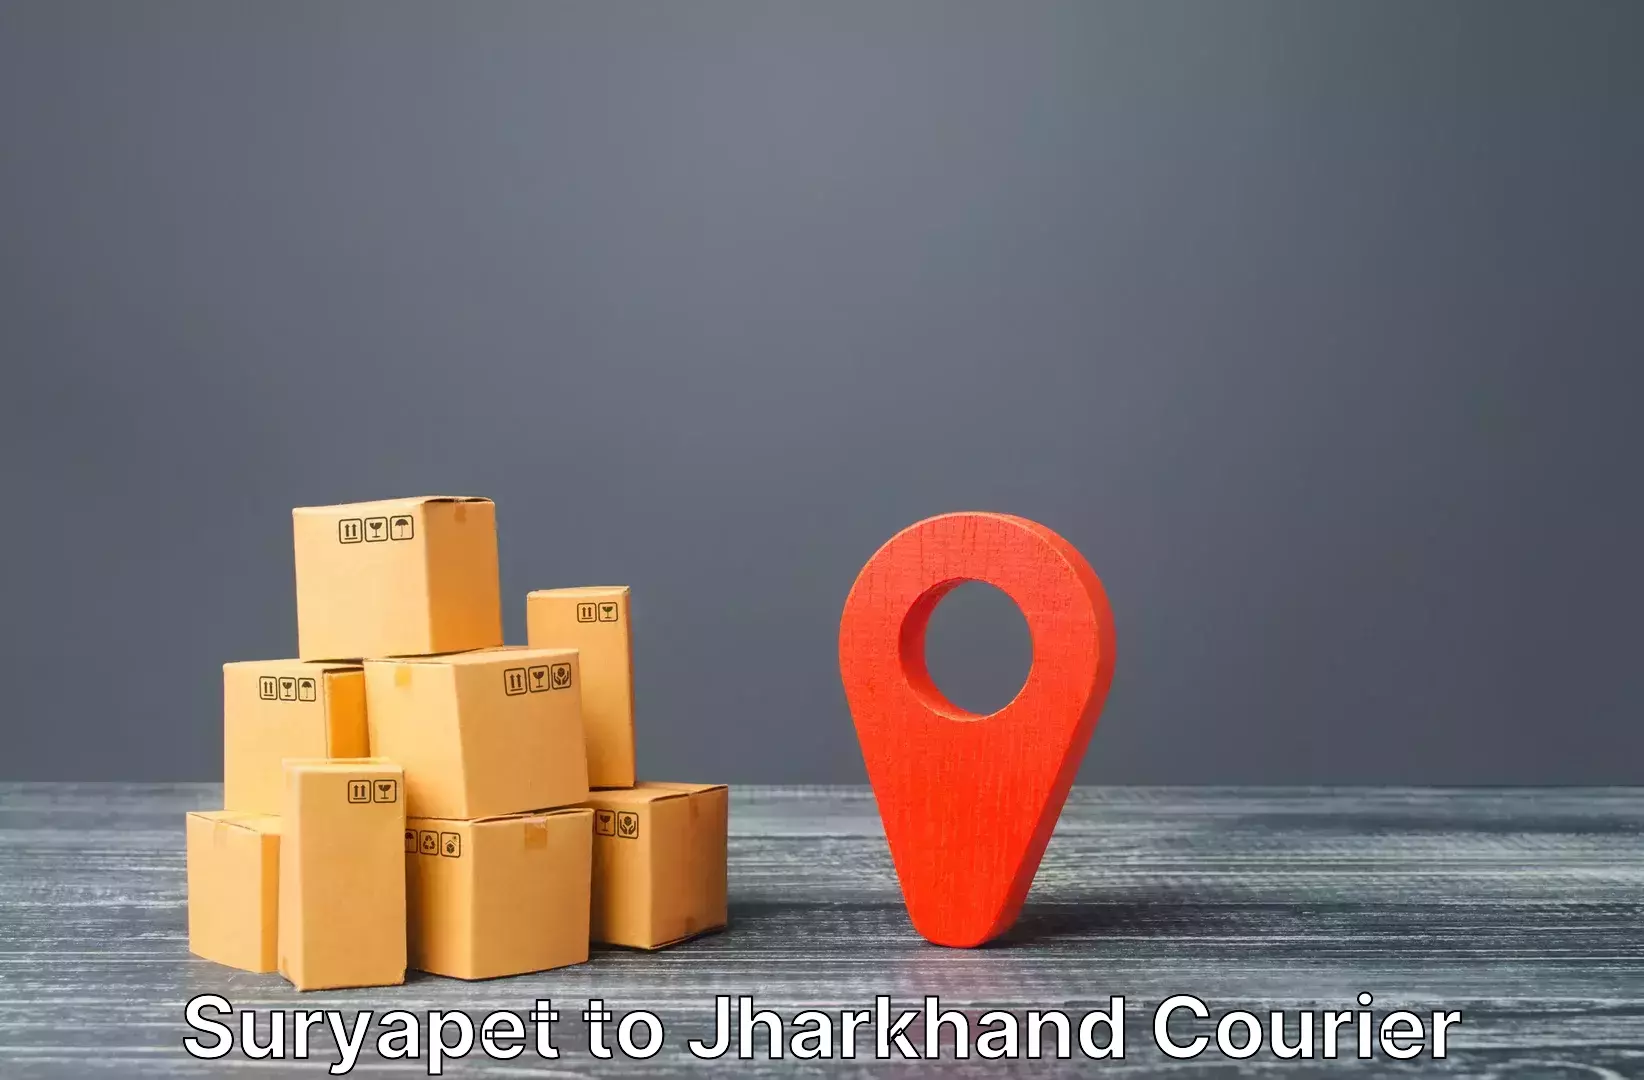 Baggage transport technology Suryapet to Jharkhand